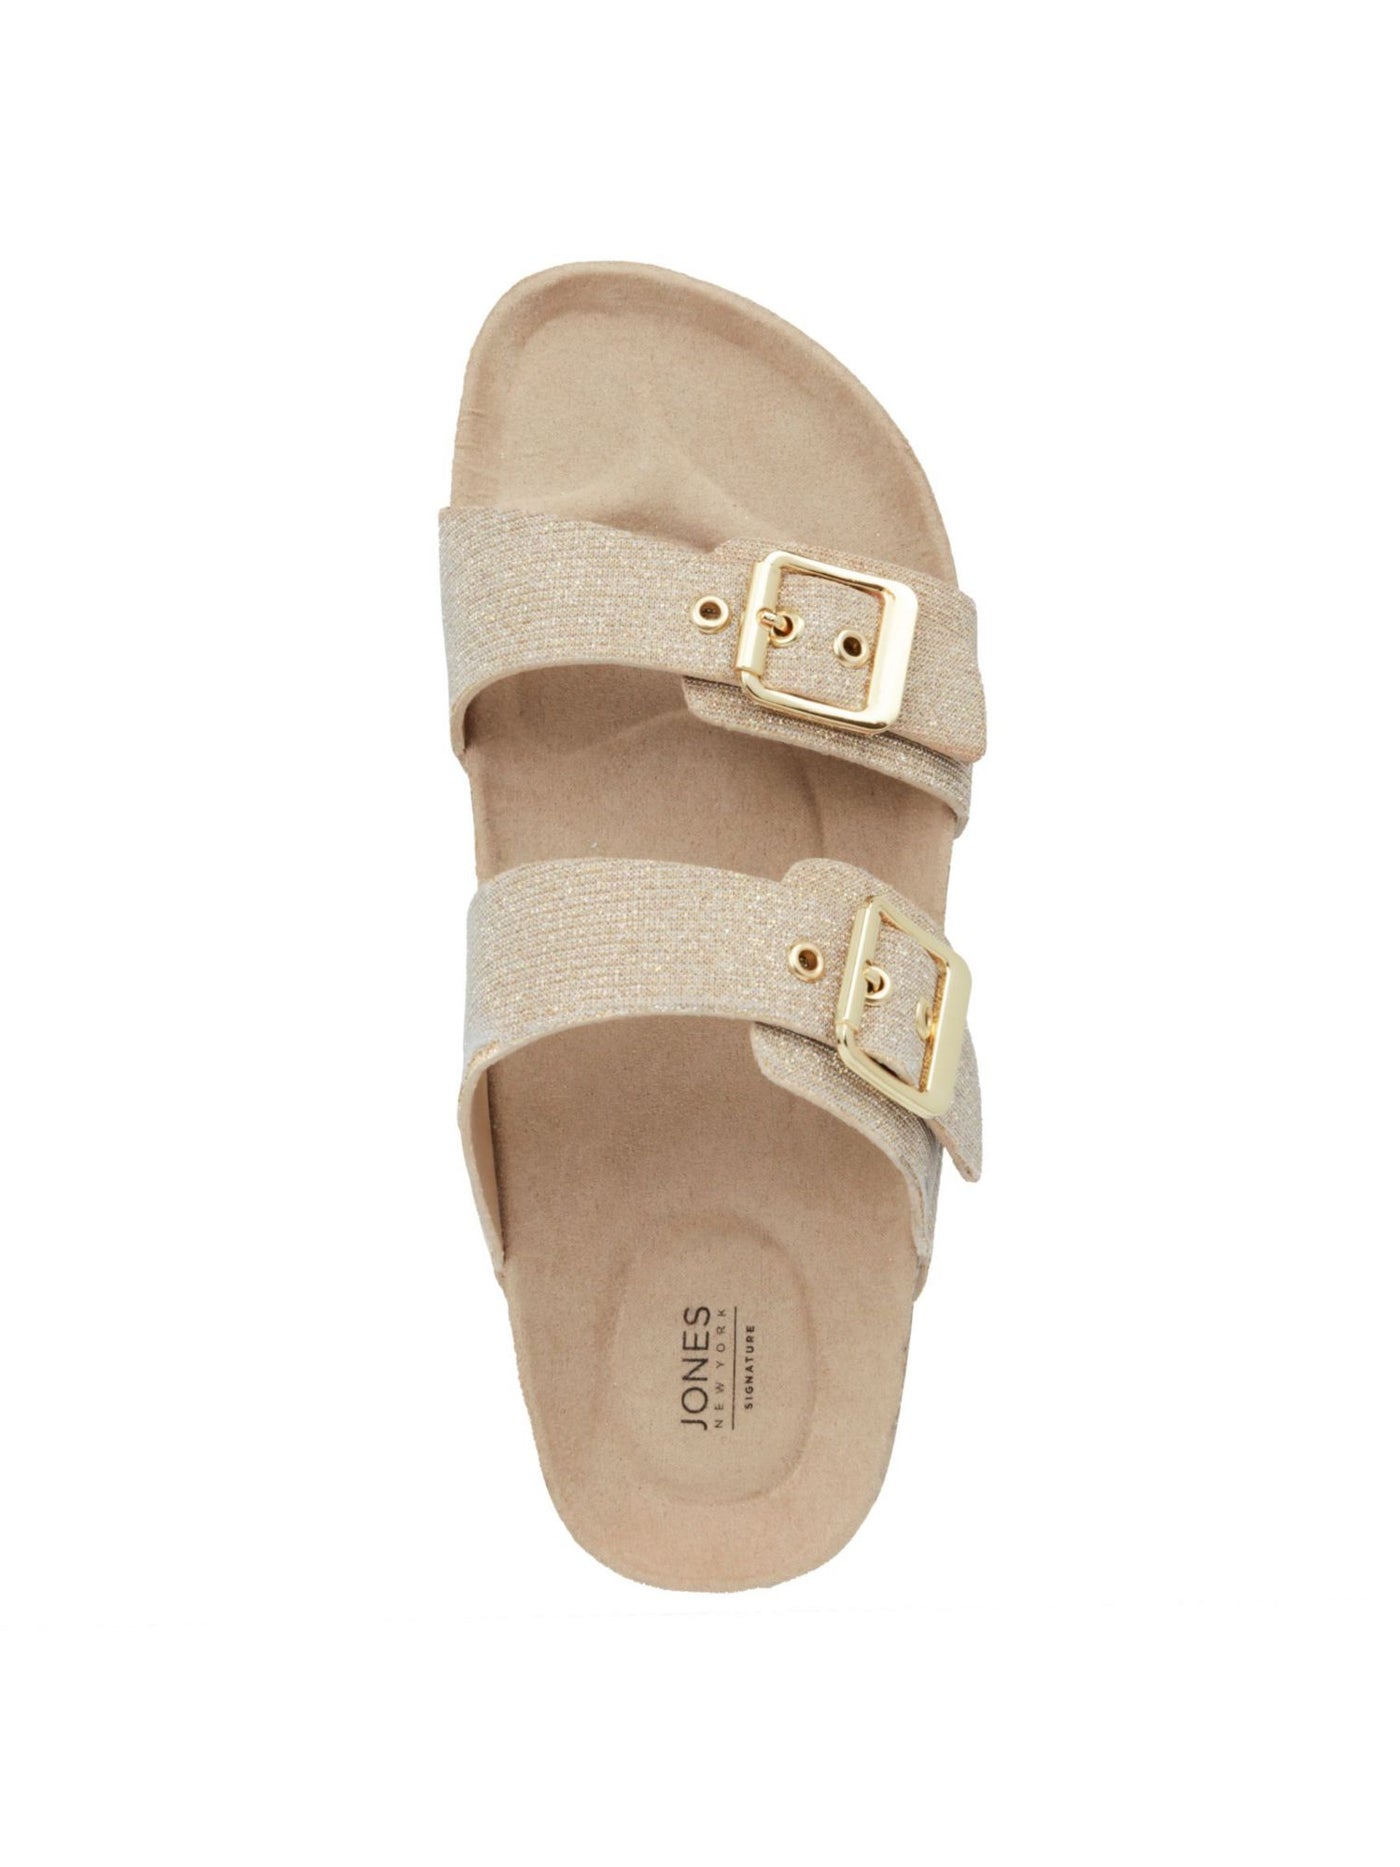 JONES NY Womens Beige Double Band Cork-Like Jute Buckle Accent Arch Support Weslee Round Toe Platform Slip On Slide Sandals Shoes 7 M